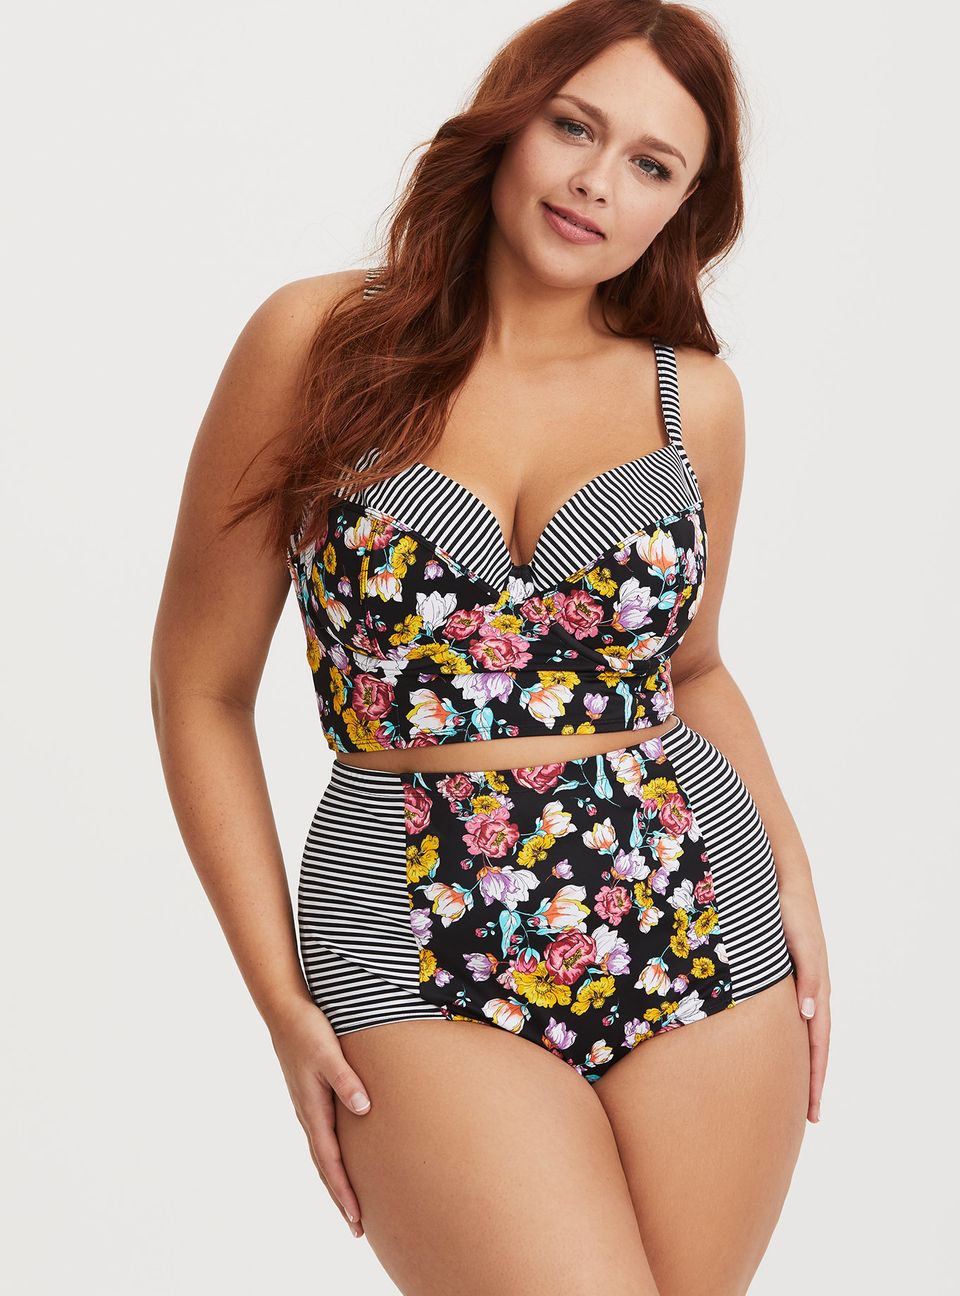 Plus-Size Swimsuits With Underwire Are Here To You Up | HuffPost Life